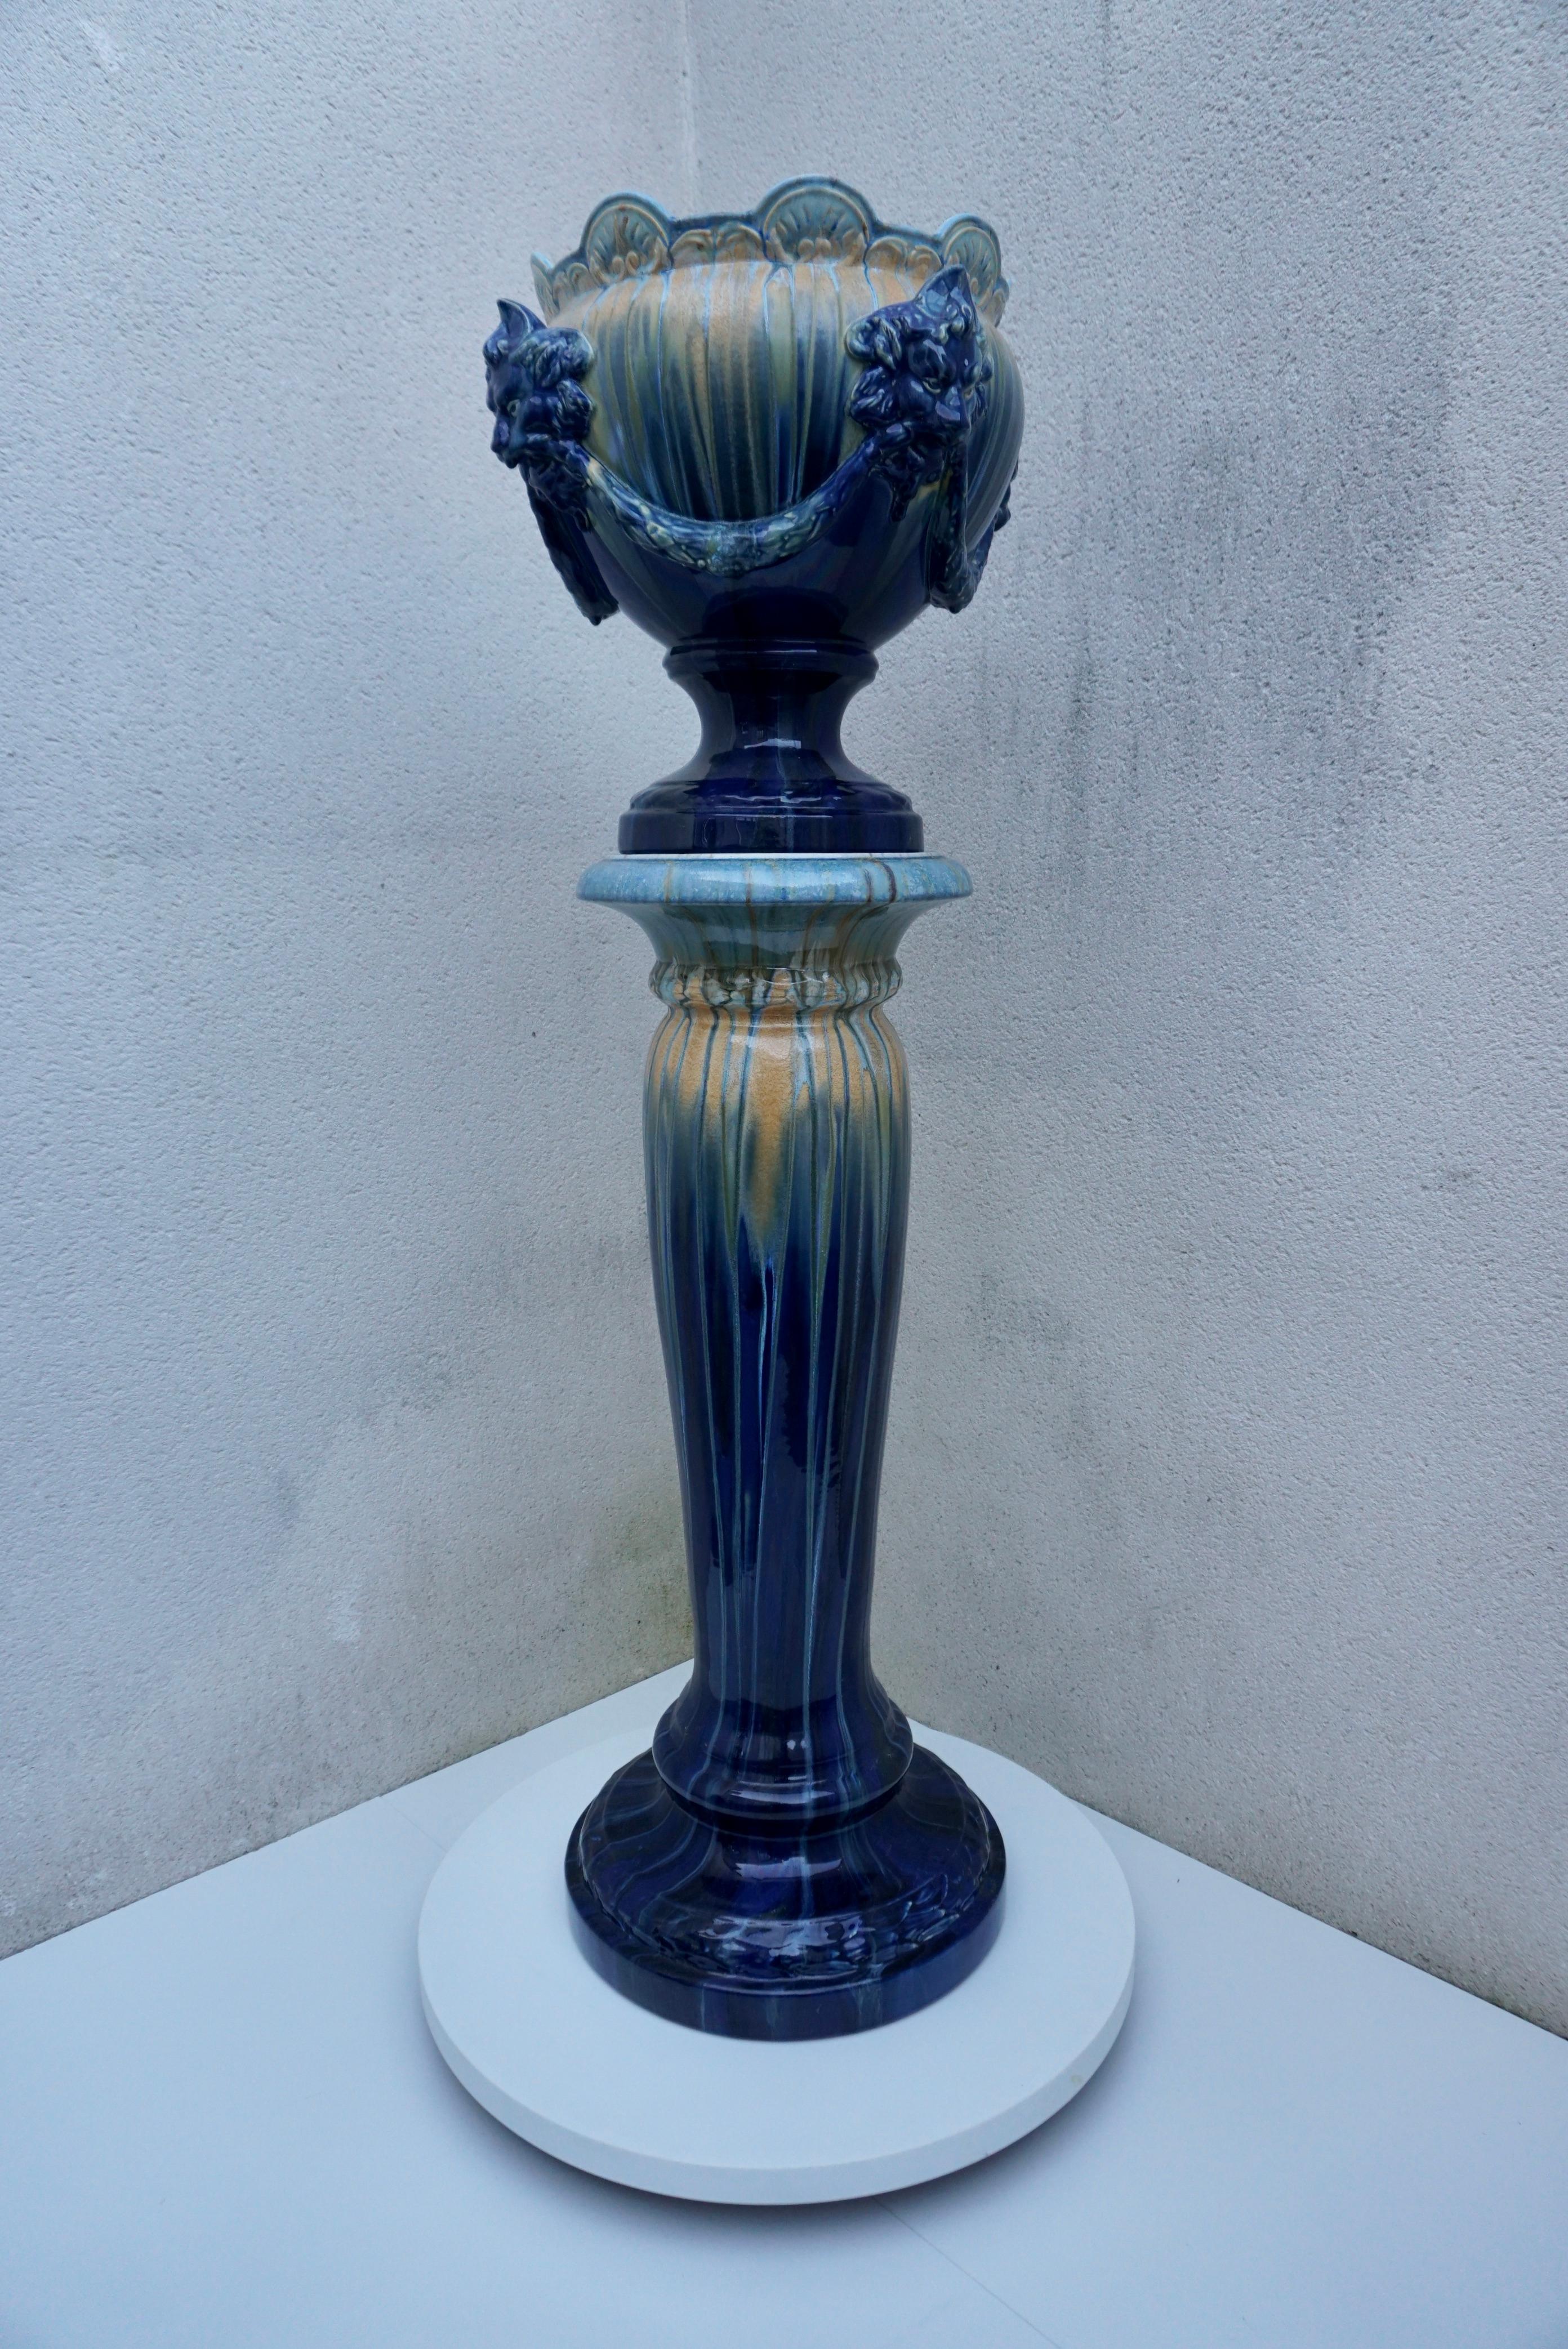 A jardiniere or planter on a stand with lion head decor in Flemish earthenware style. Art Nouveau Majolica jardinière, planter with stand in the style of Delphin Massier & Fils at Vallauris. The jardinière is exactly matched to the stand on which it